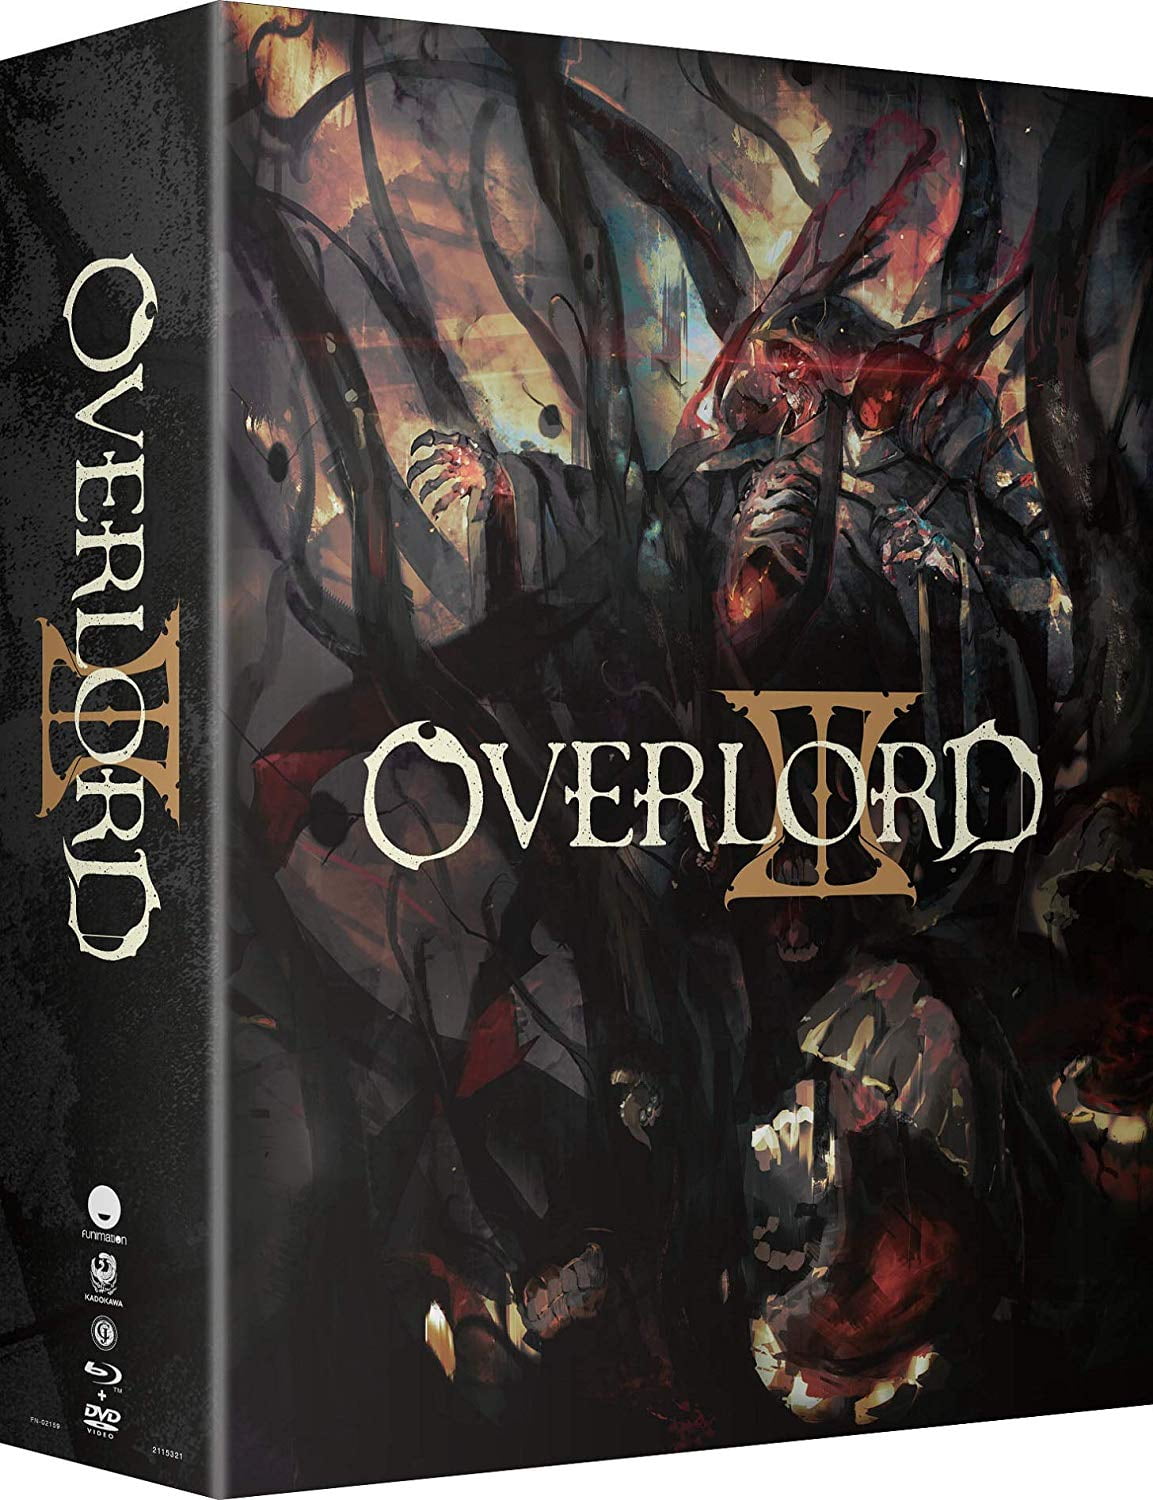 CDJapan : [D/L:7/Dec/'18] Overlord III for complete set!